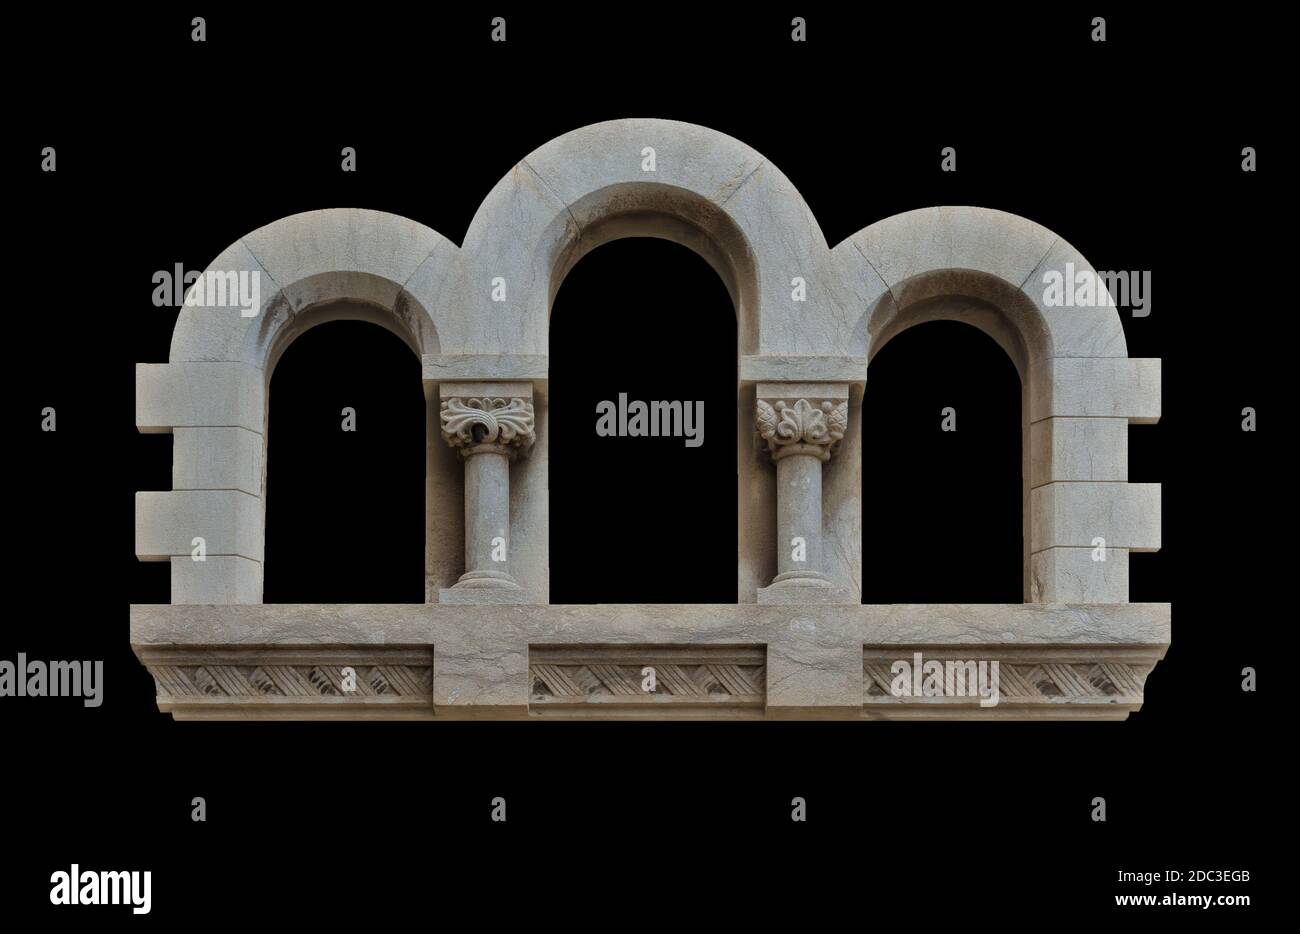 On the streets in Catalonia, public places. Elements of architectural decorations of buildings, doorways and arches, plaster moldings and patterns. Stock Photo